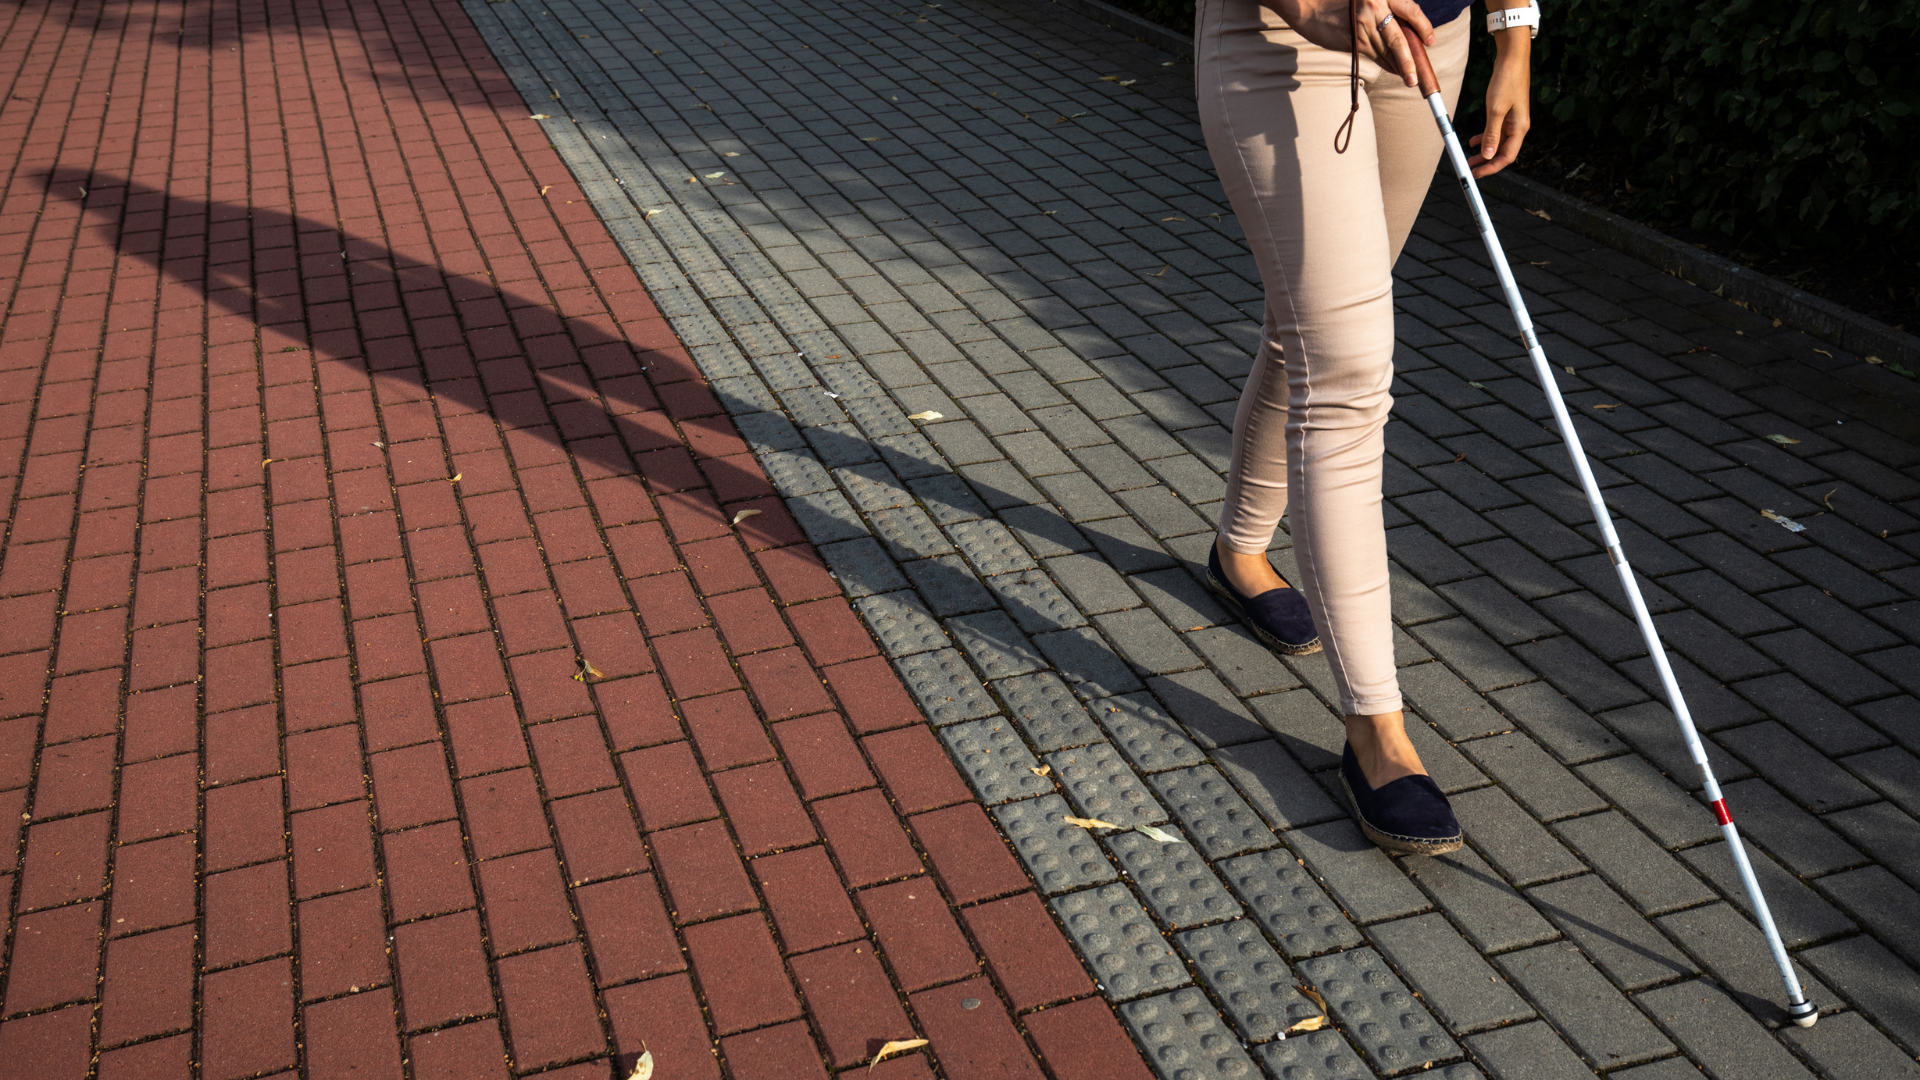 Image of a person using a white mobility cane on a brick sidewalk.